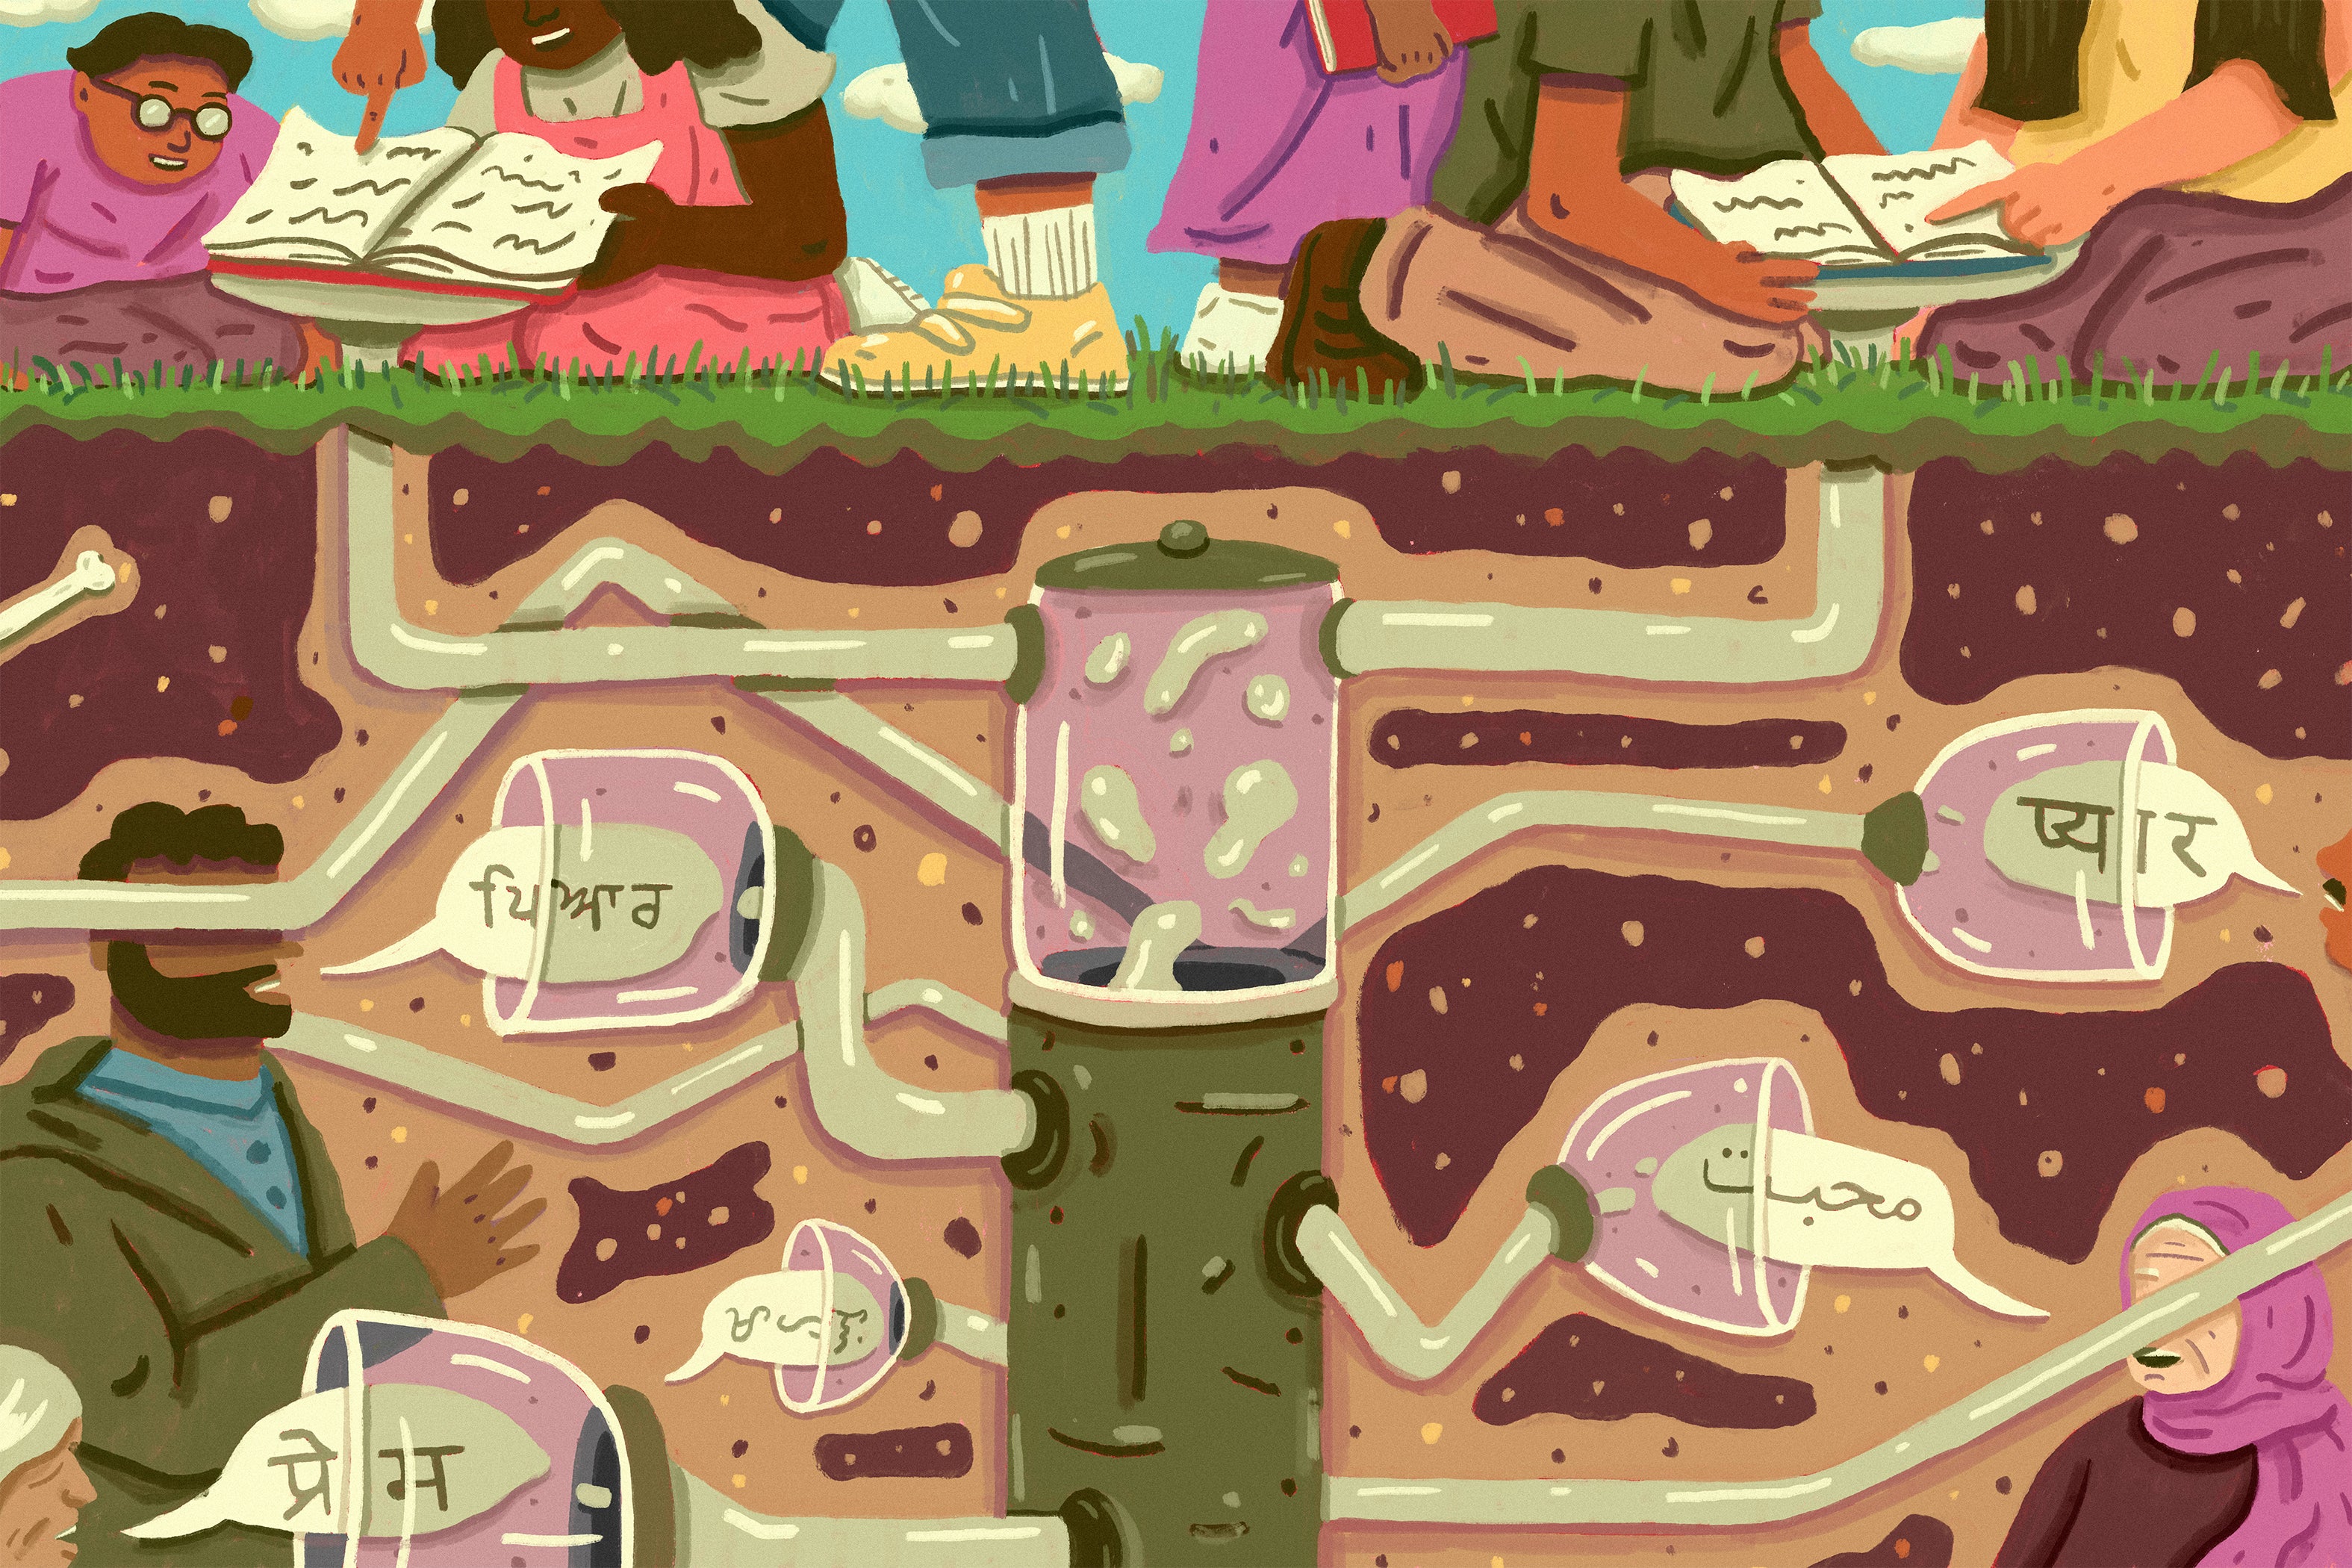 An illustration divided into above-ground and underground parts. Above ground, children gather around books. Underground, speakers are shown with speaker bubbles that feed into a machine, which is connected to the books above ground.